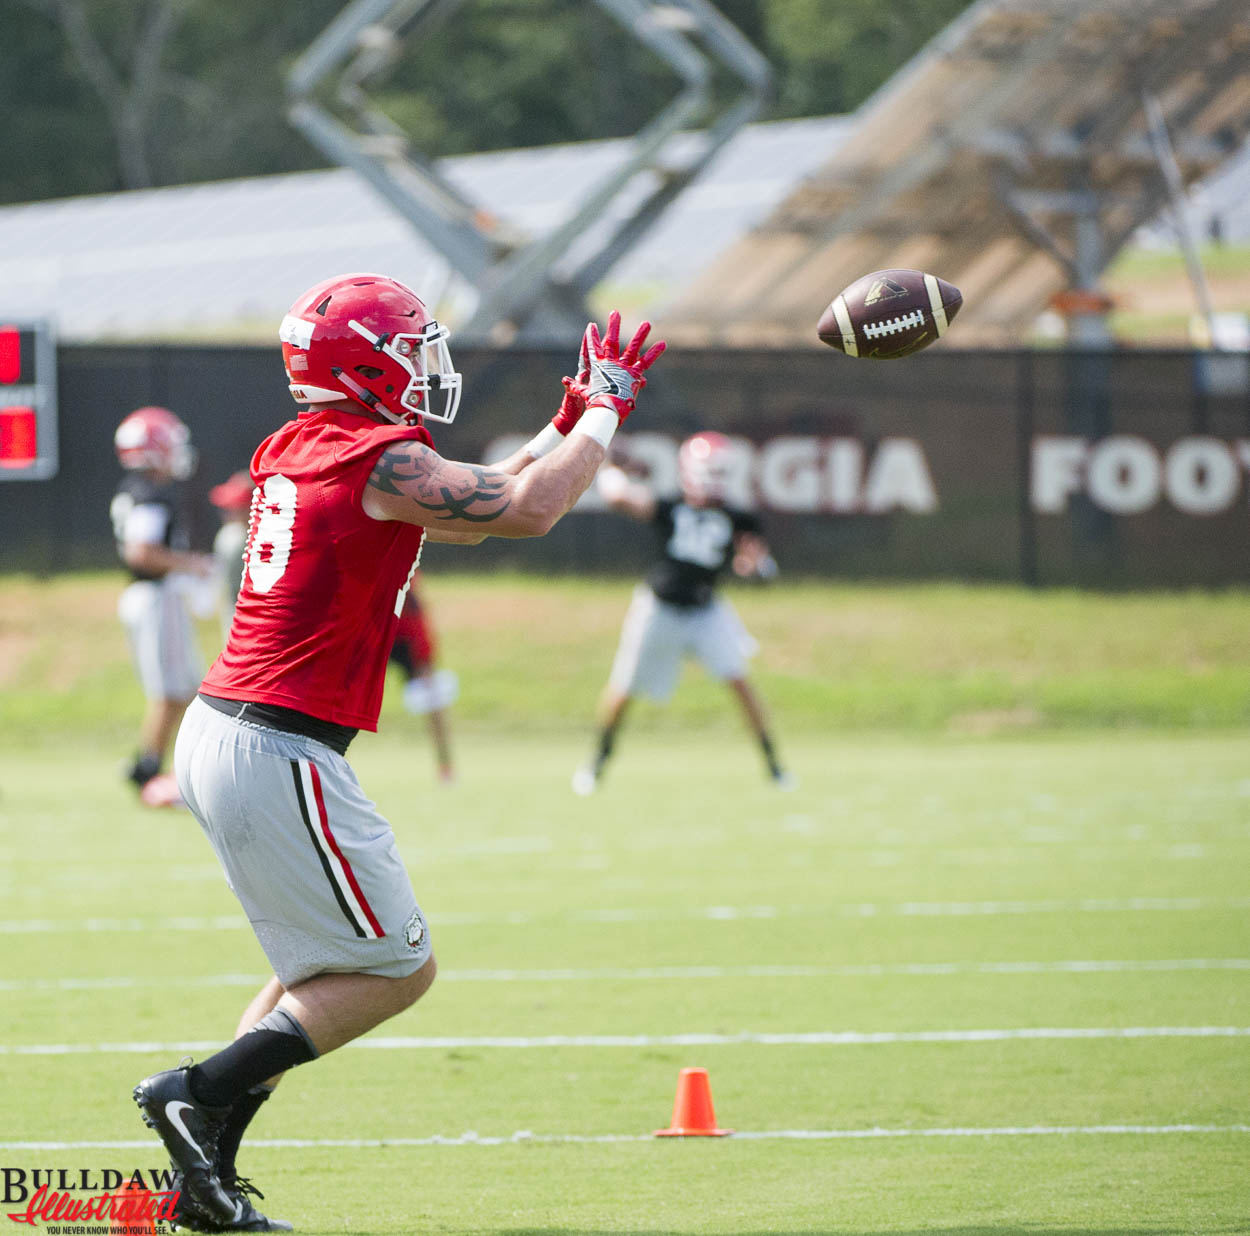 Isaac Nauta with the catch